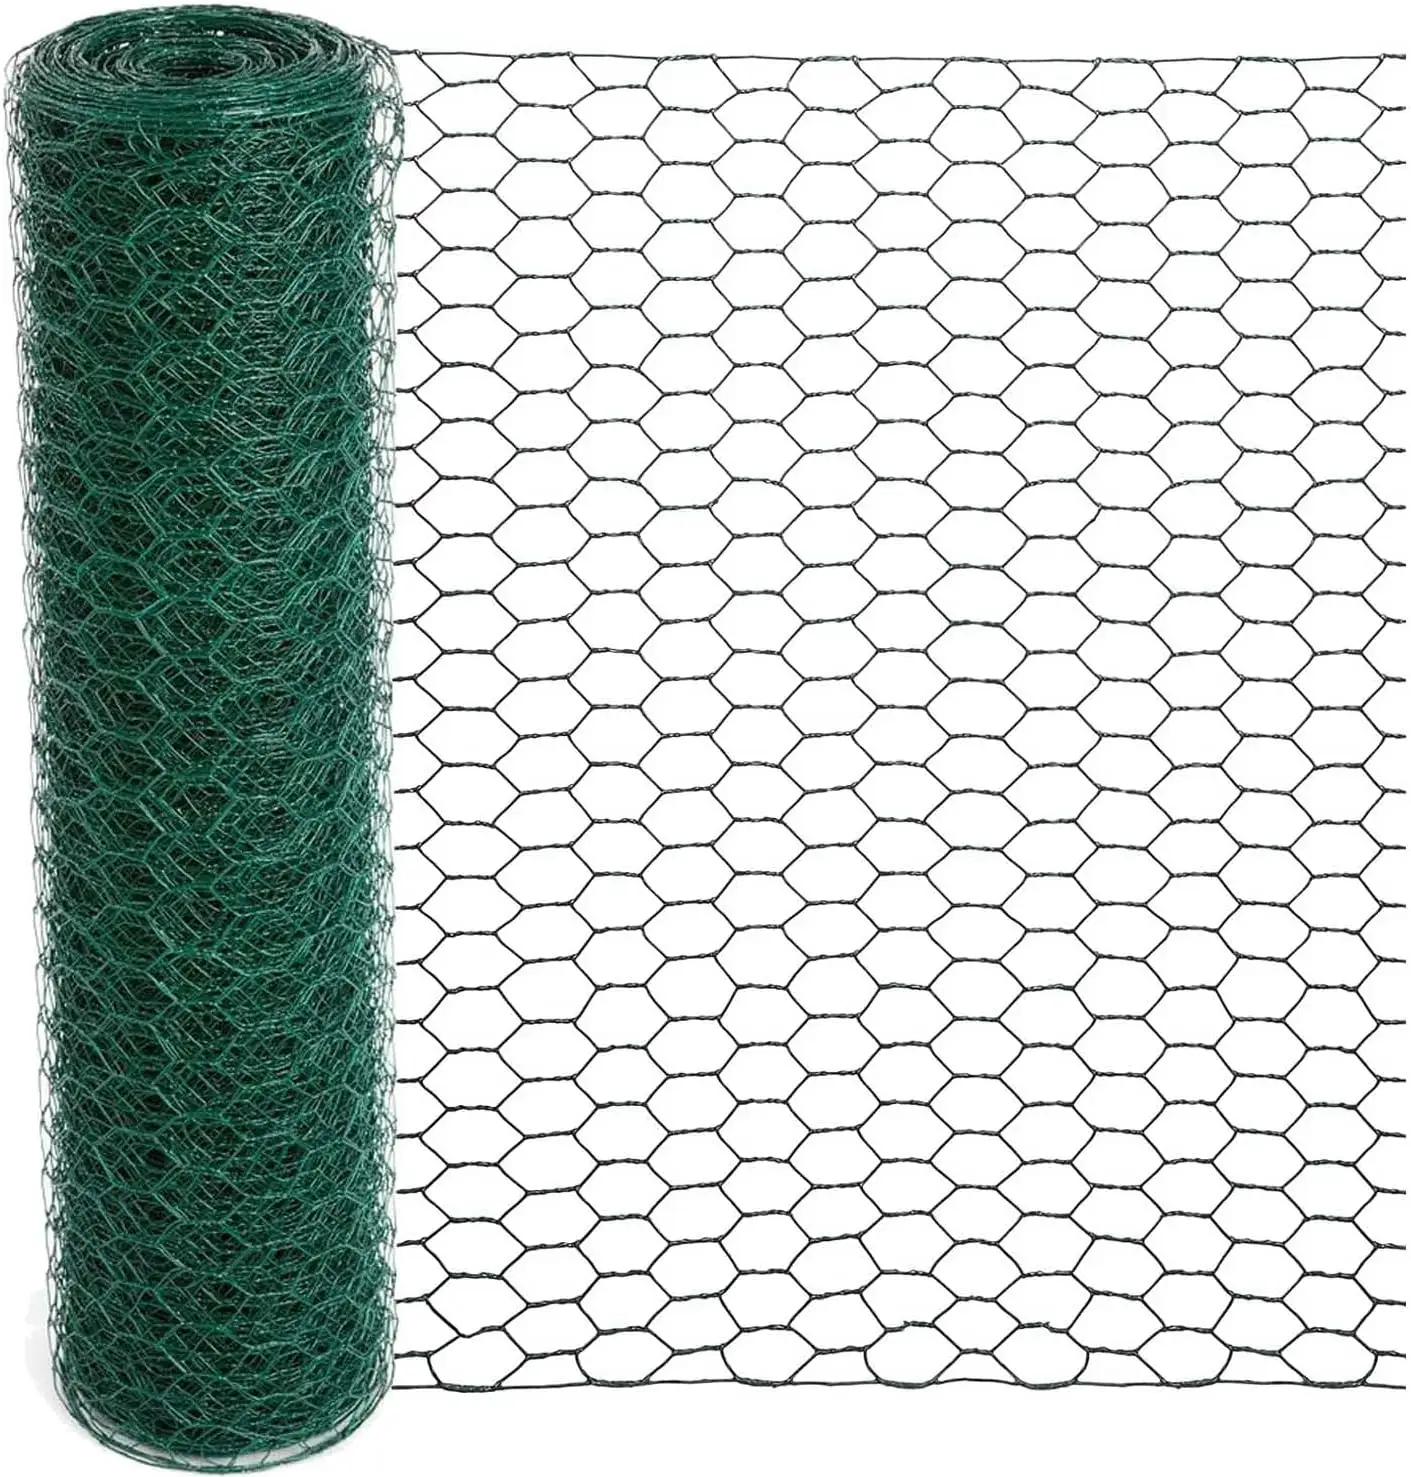 Customizable Floral Wire Hexagonal Galvanized PVC Coated Chicken Wire Netting Fence for Crafts Poultry Garden